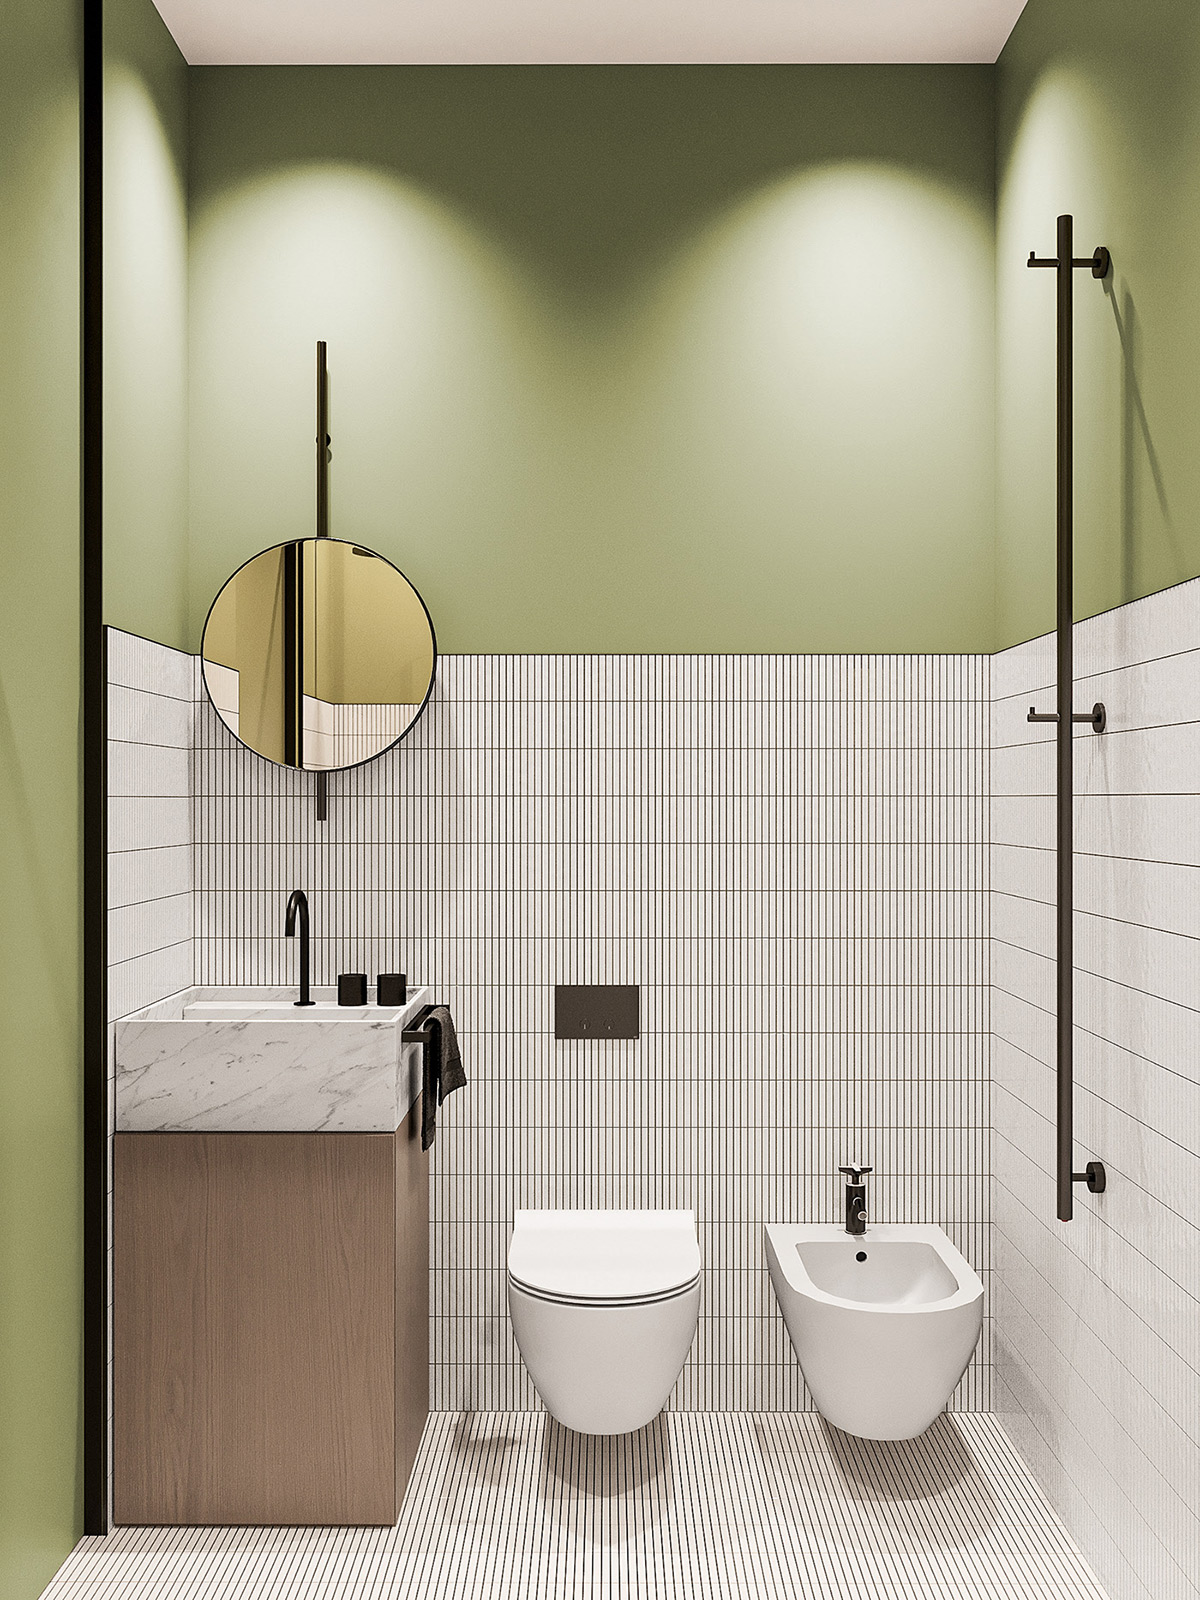 If you're unsure whether to commit to a green color scheme, select neutral fixtures and fittings and apply color only with your paintwork. That way, it will be quick and inexpensive to switch out.